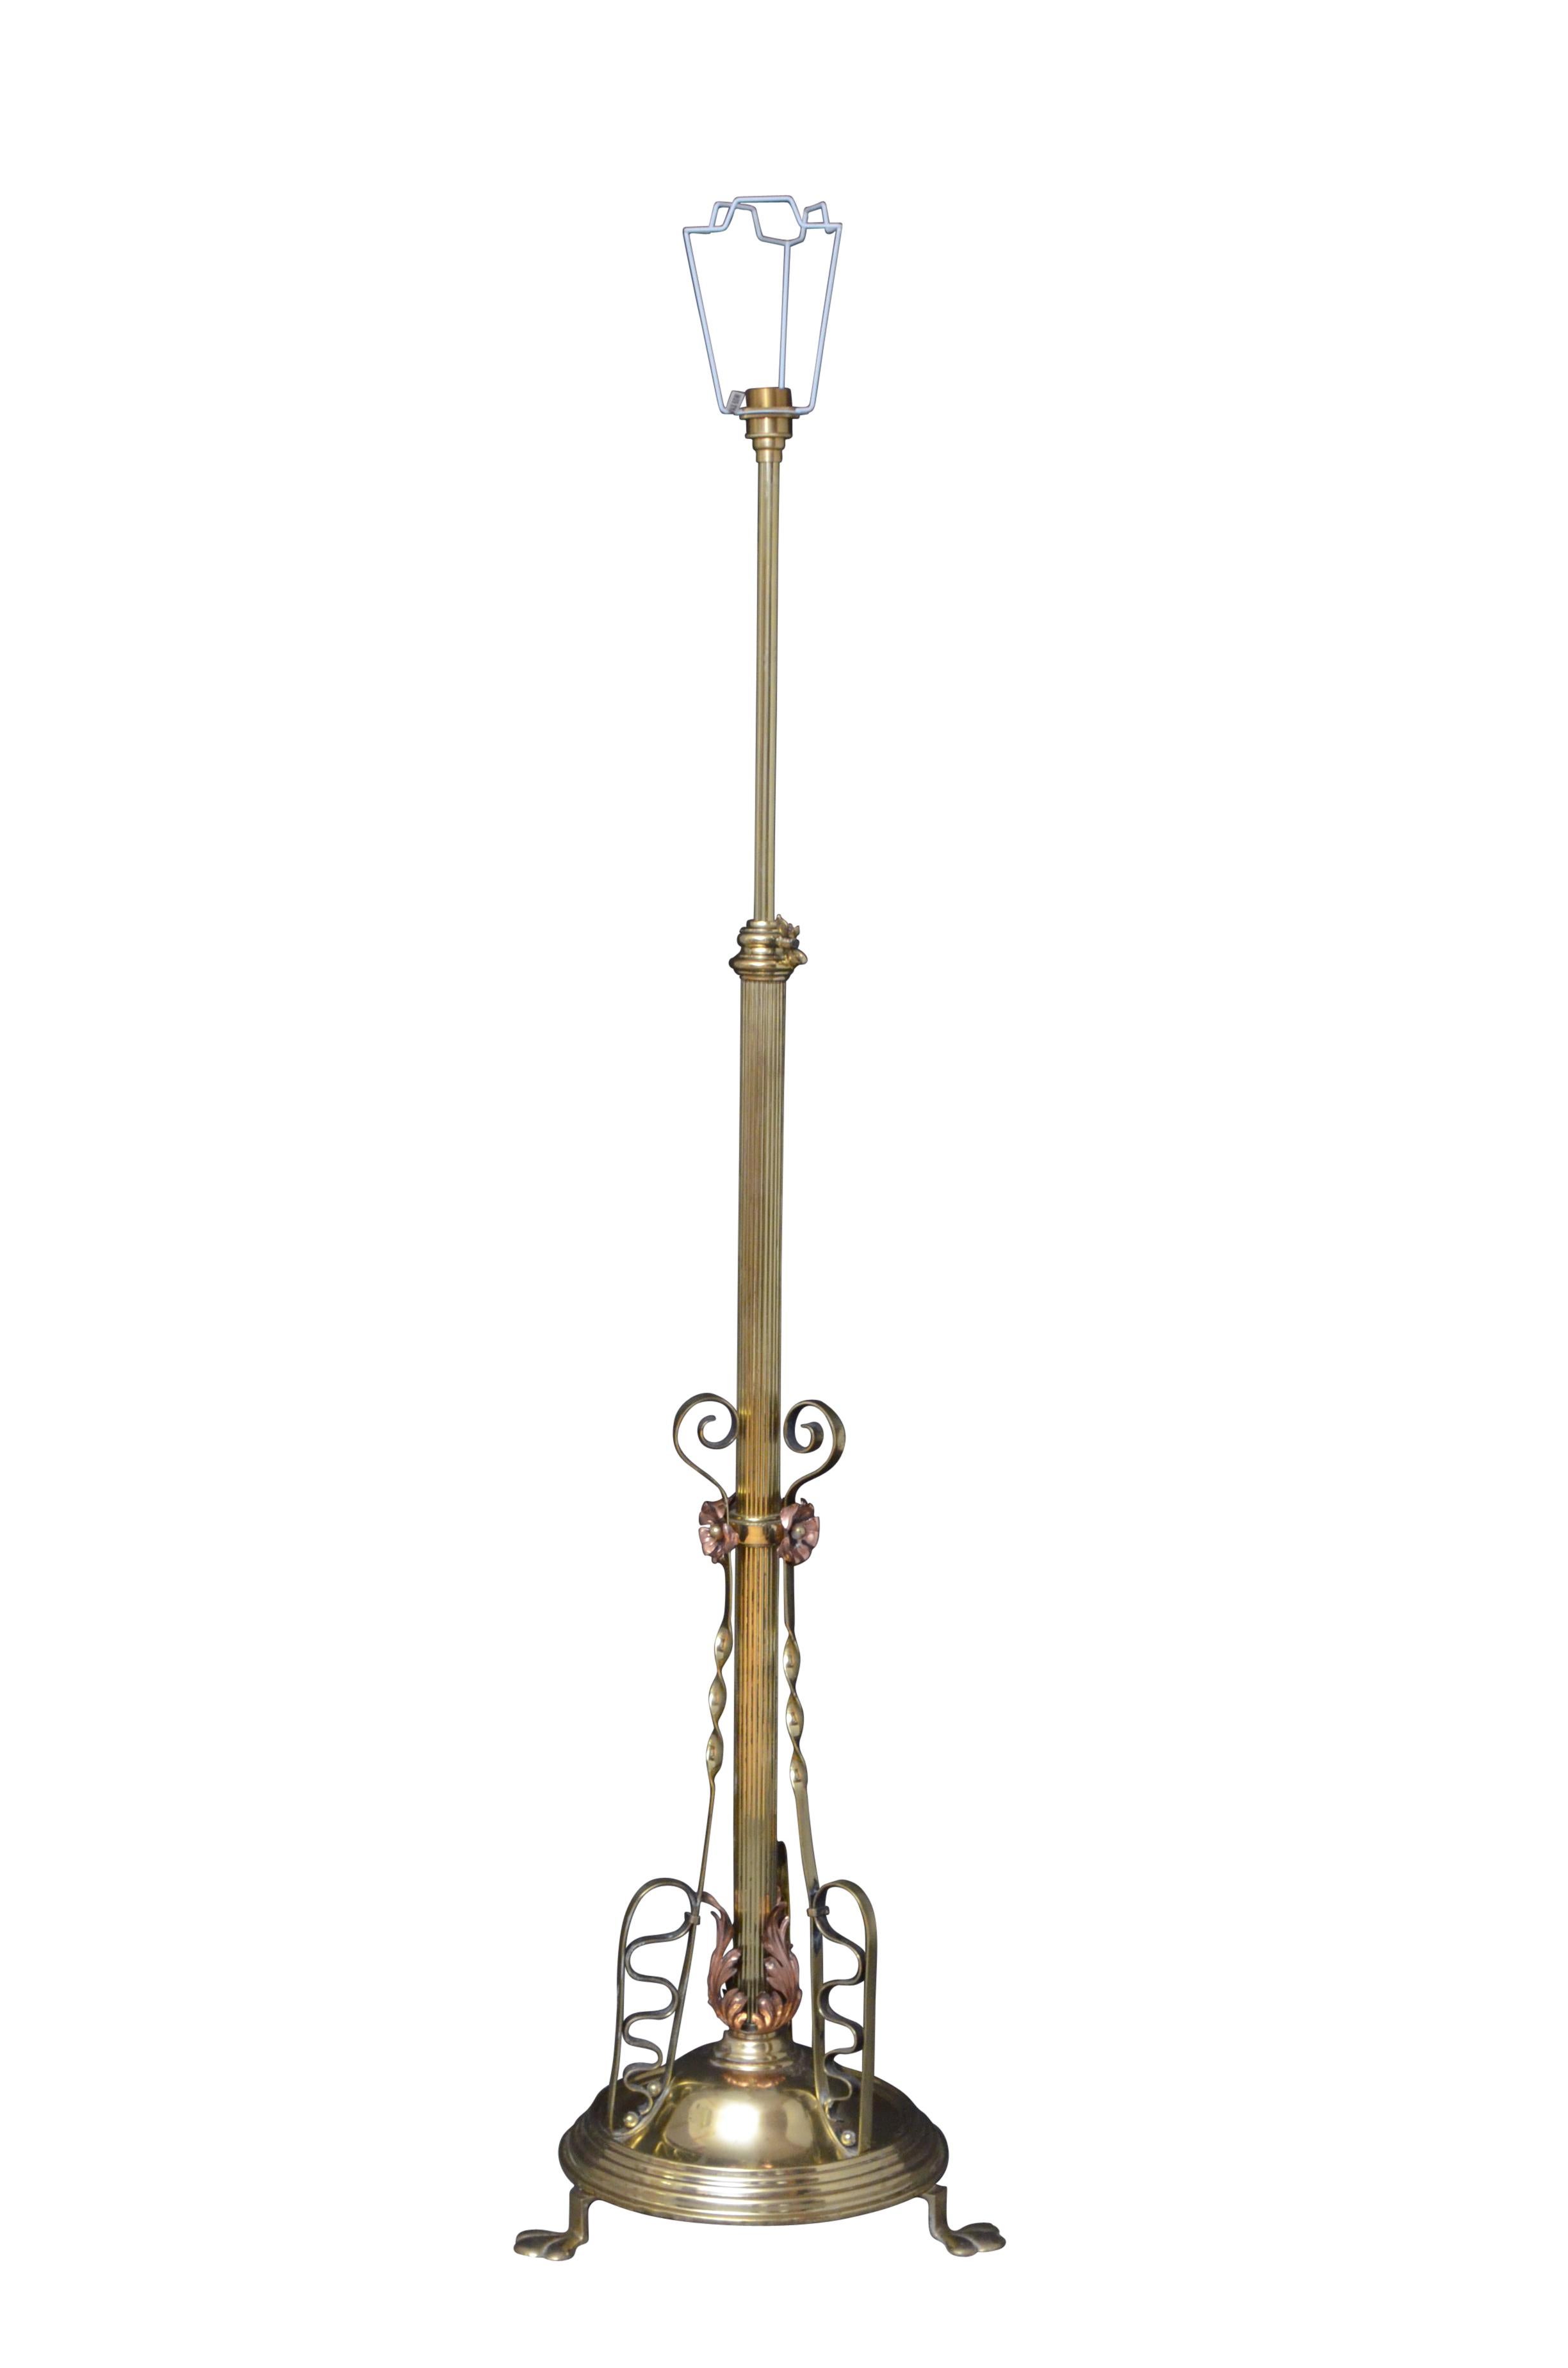 Superb late Victorian / Art Nouveau brass and copper height adjustable standard lamp, having reeded column with twisted supports, copper acanthus leaf decoration and reeded circular base terminating in 3 pad feet. This antique lamp has been rewired